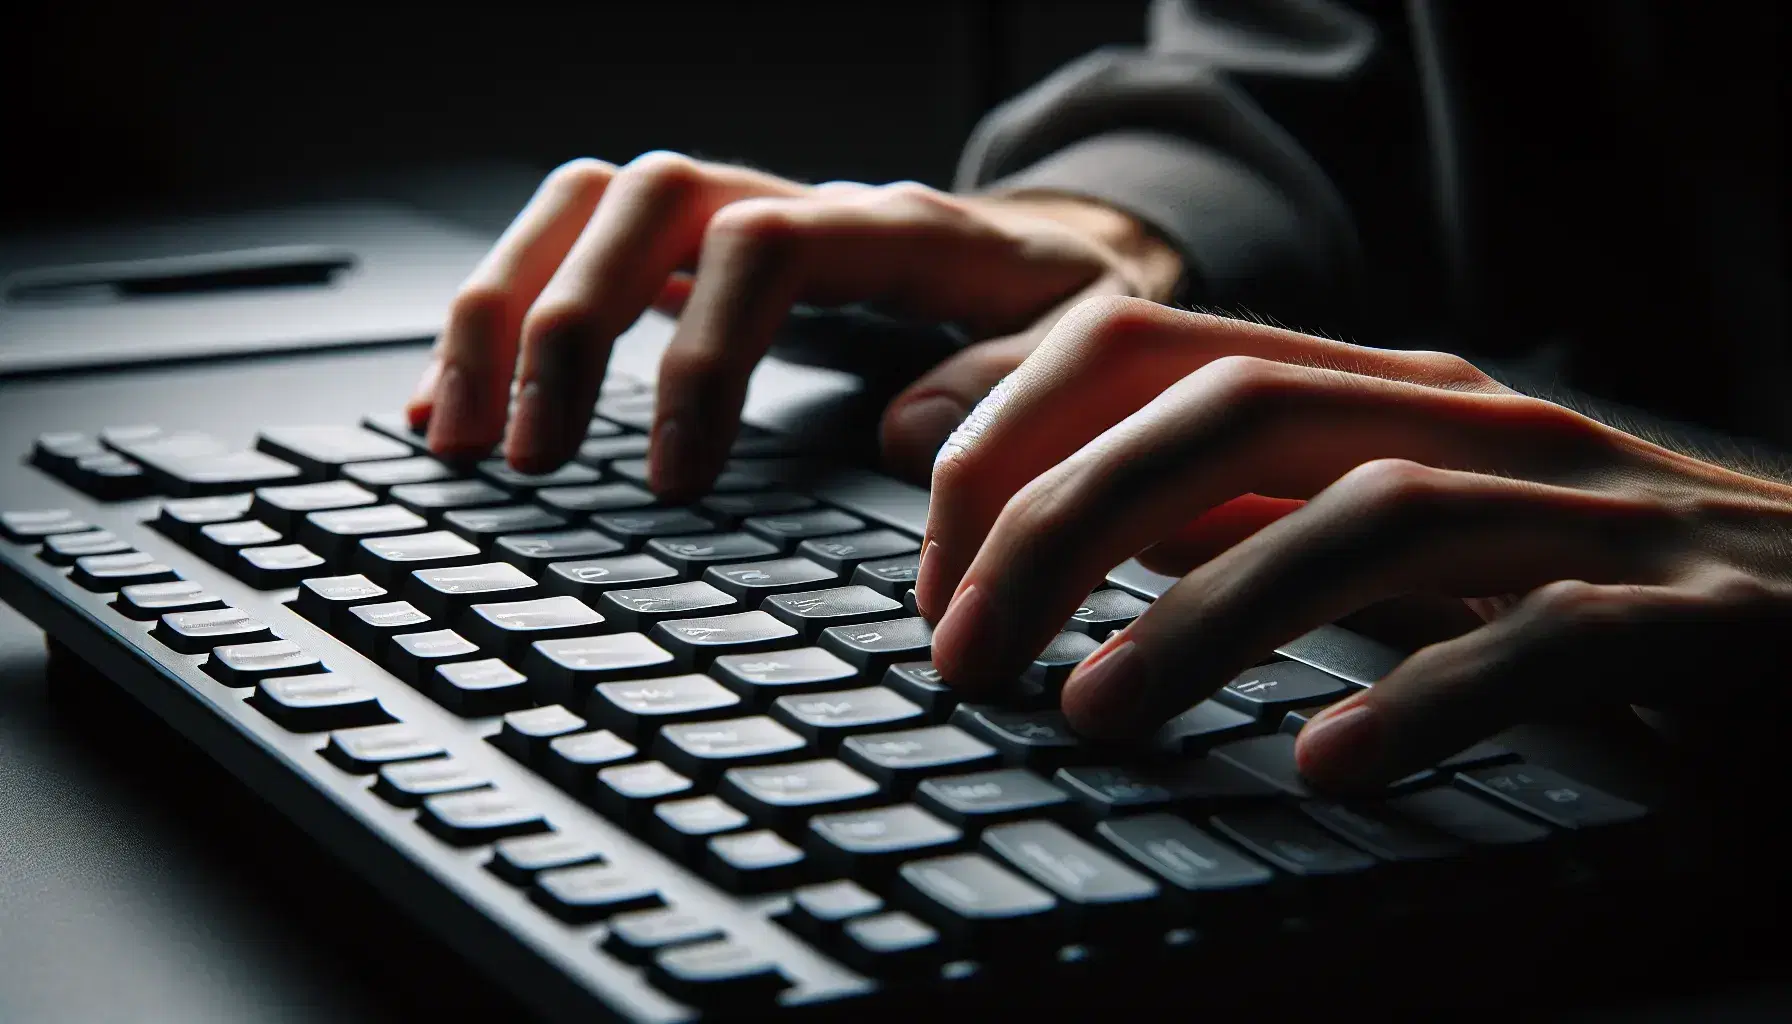 Close-up of hands typing on glossy black computer keyboard with no visible letters, on dark background with soft lighting.